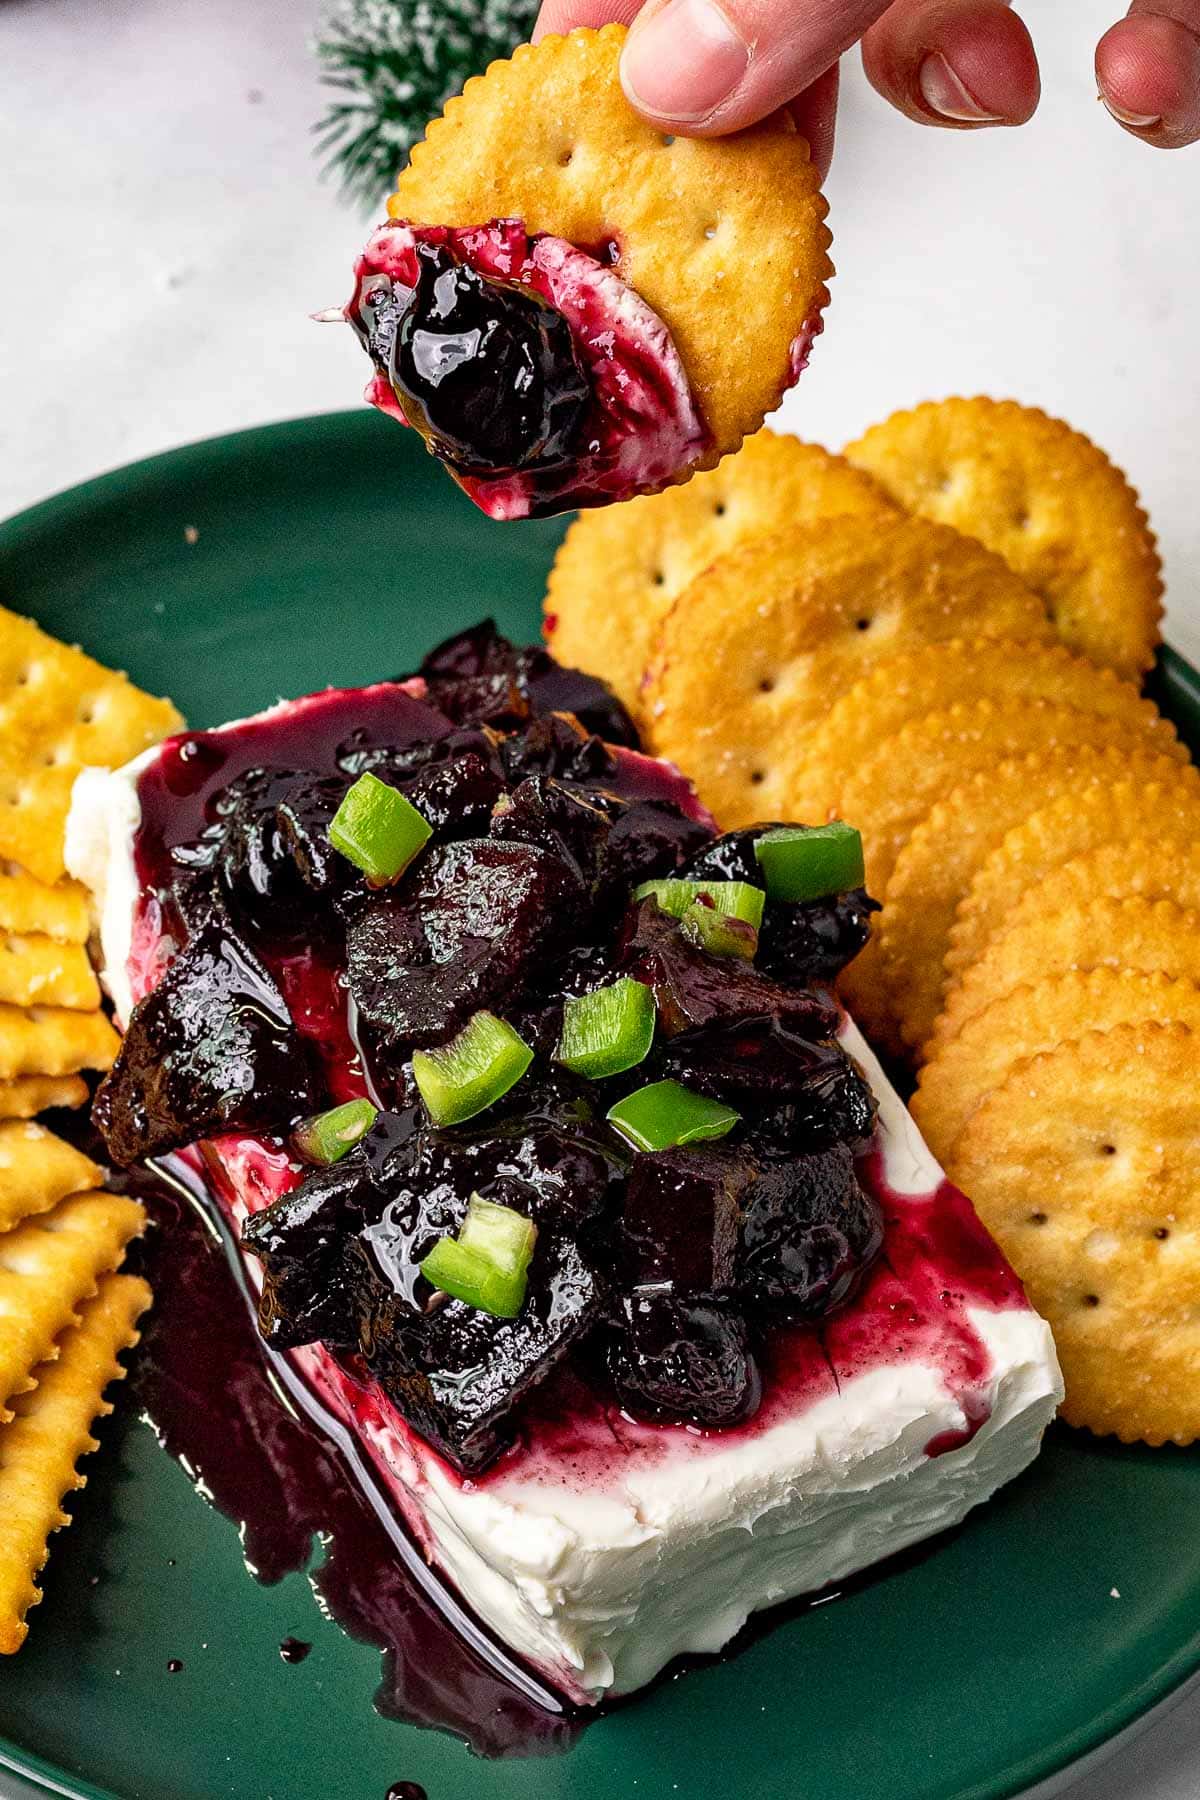 Cherry Jalapeno Jam prepared and served on cream cheese with crackers, dipping cracker in jam and cream cheese